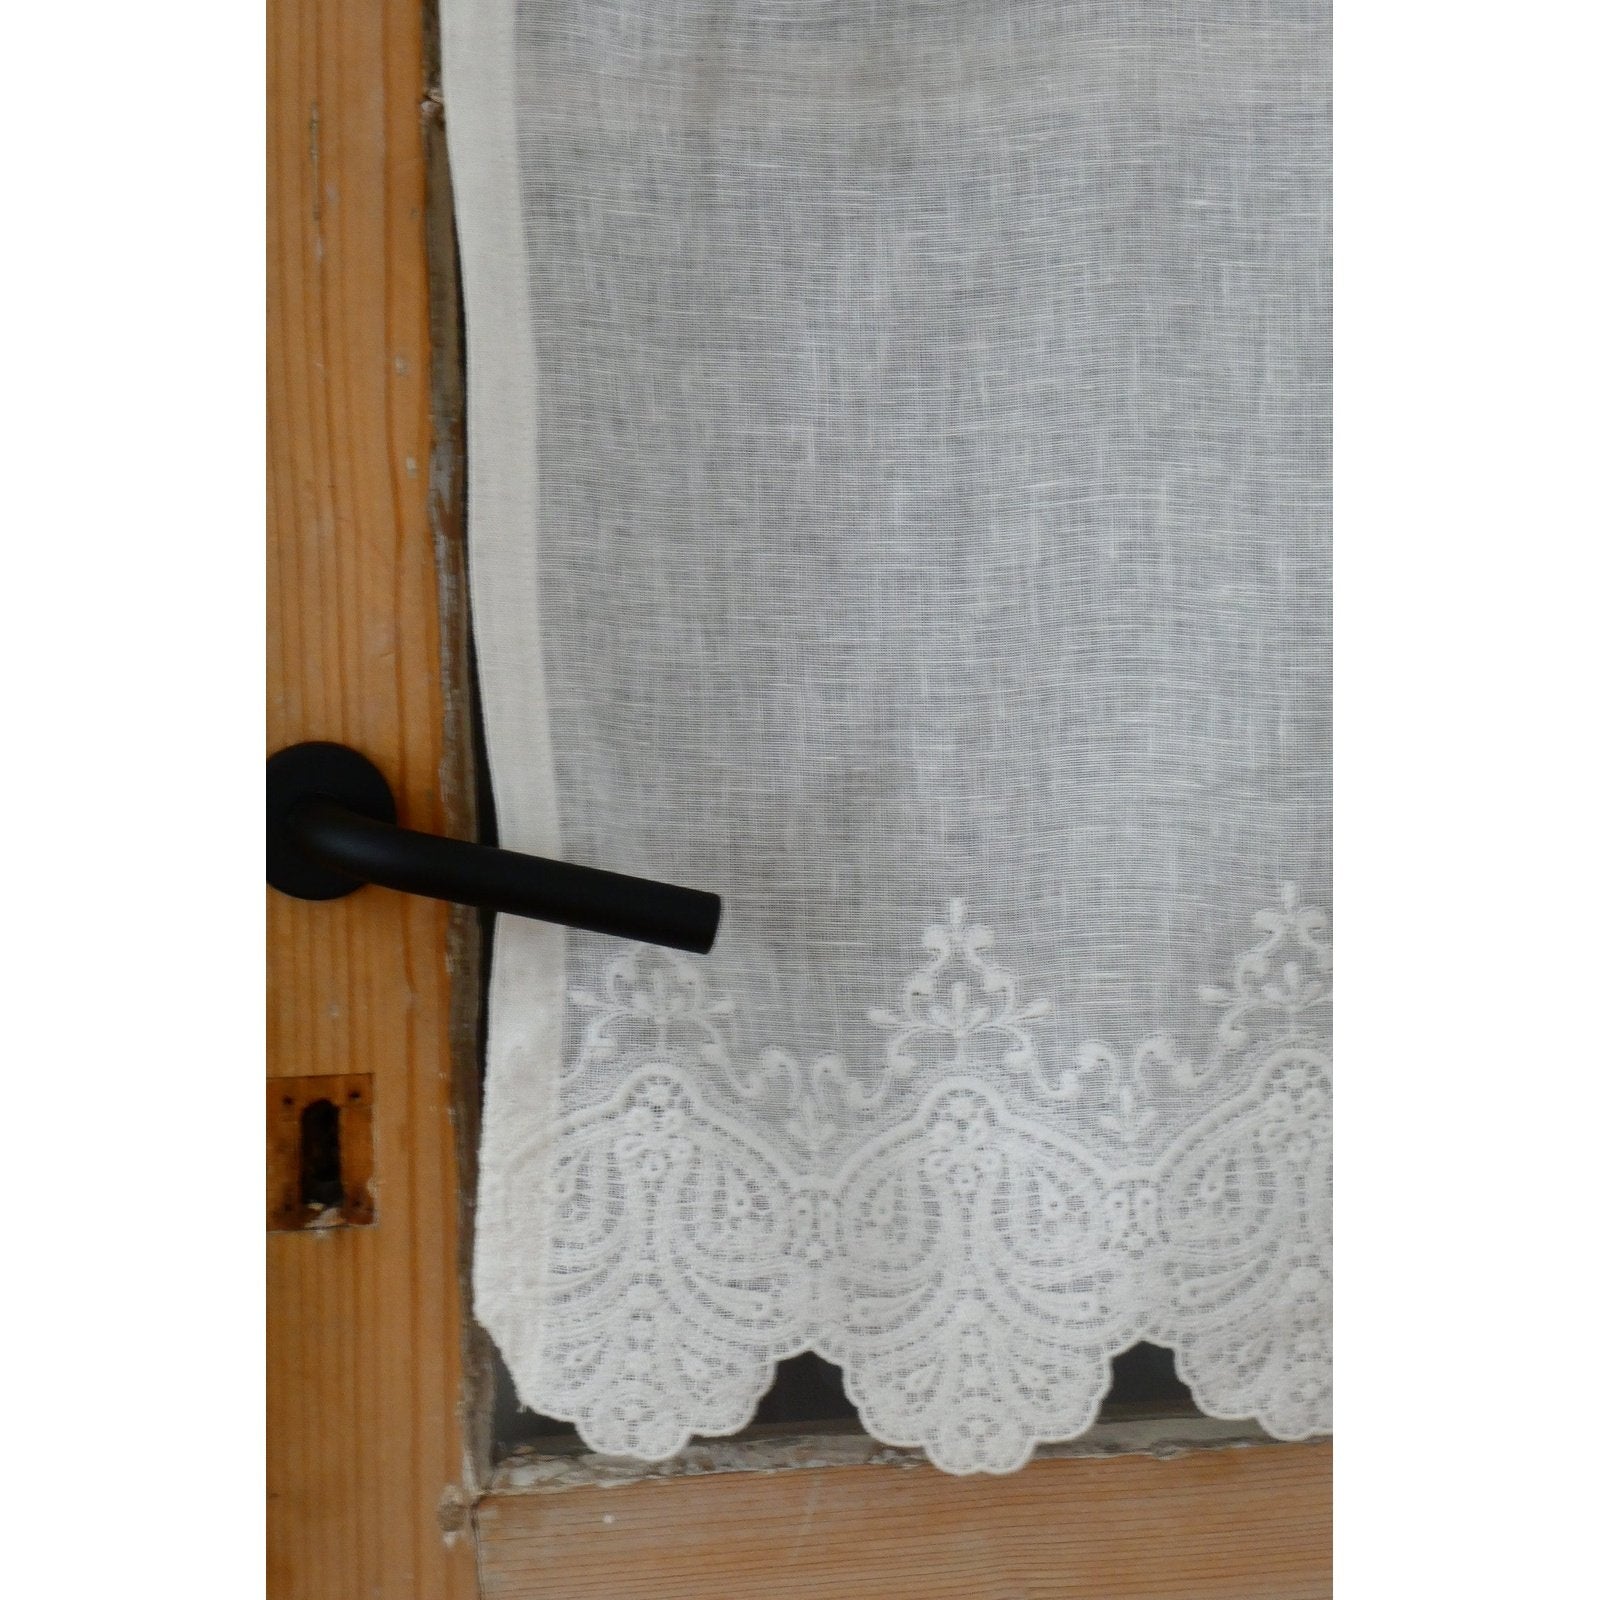 Off-white linen short curtain with delicate embroidery and a scalloped hem.